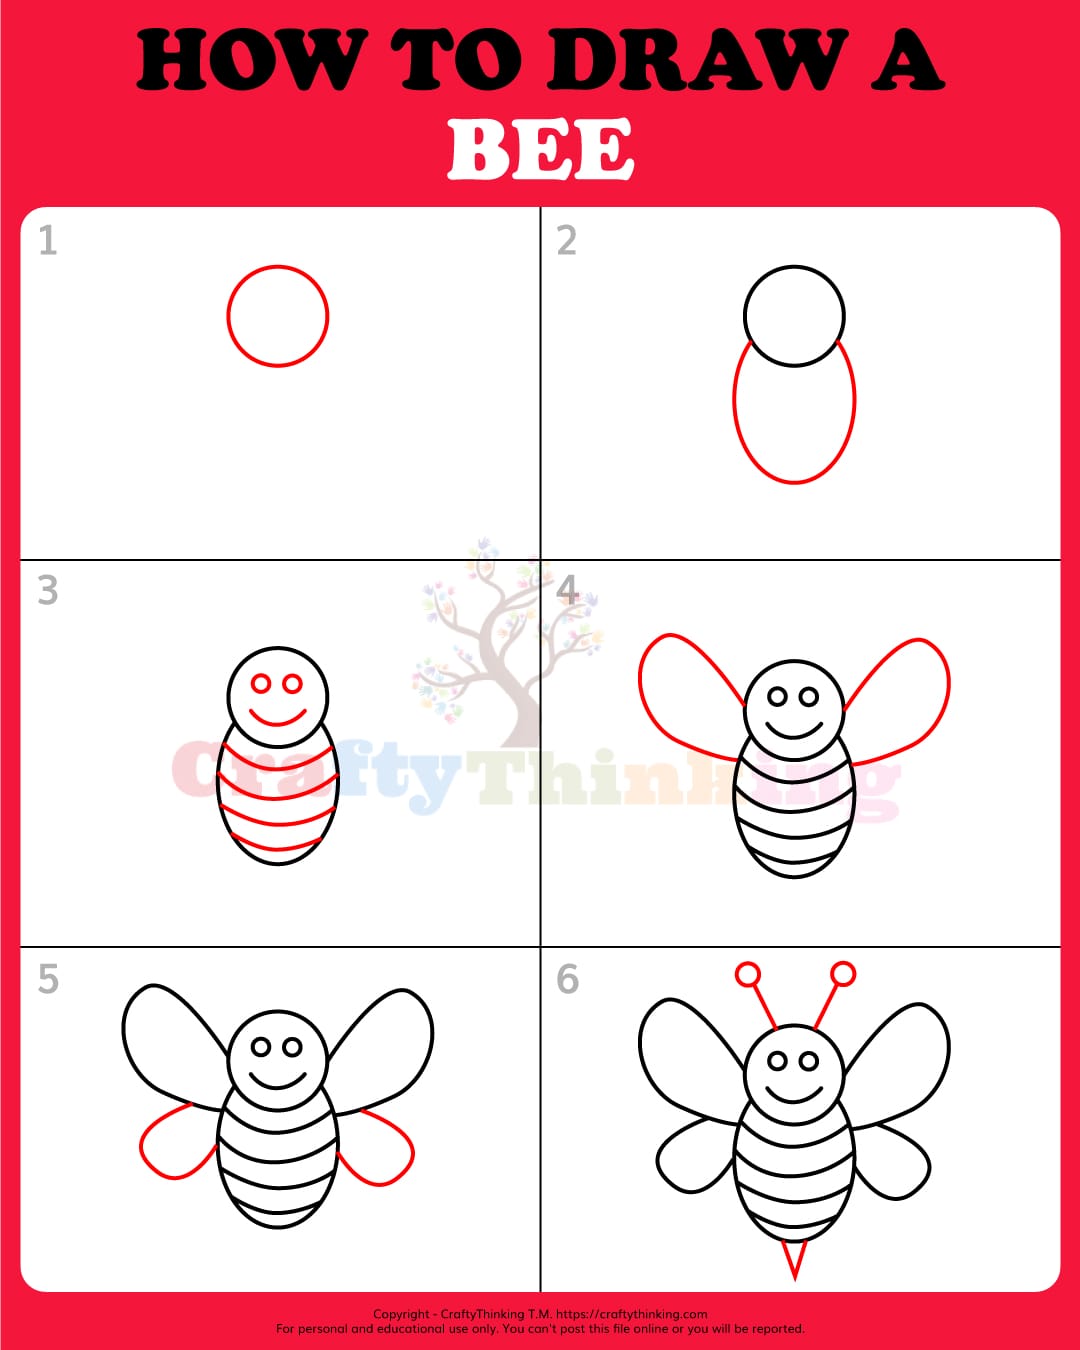 How to Draw a Bee: Step by Step Cute Bee Tutorial - CraftyThinking